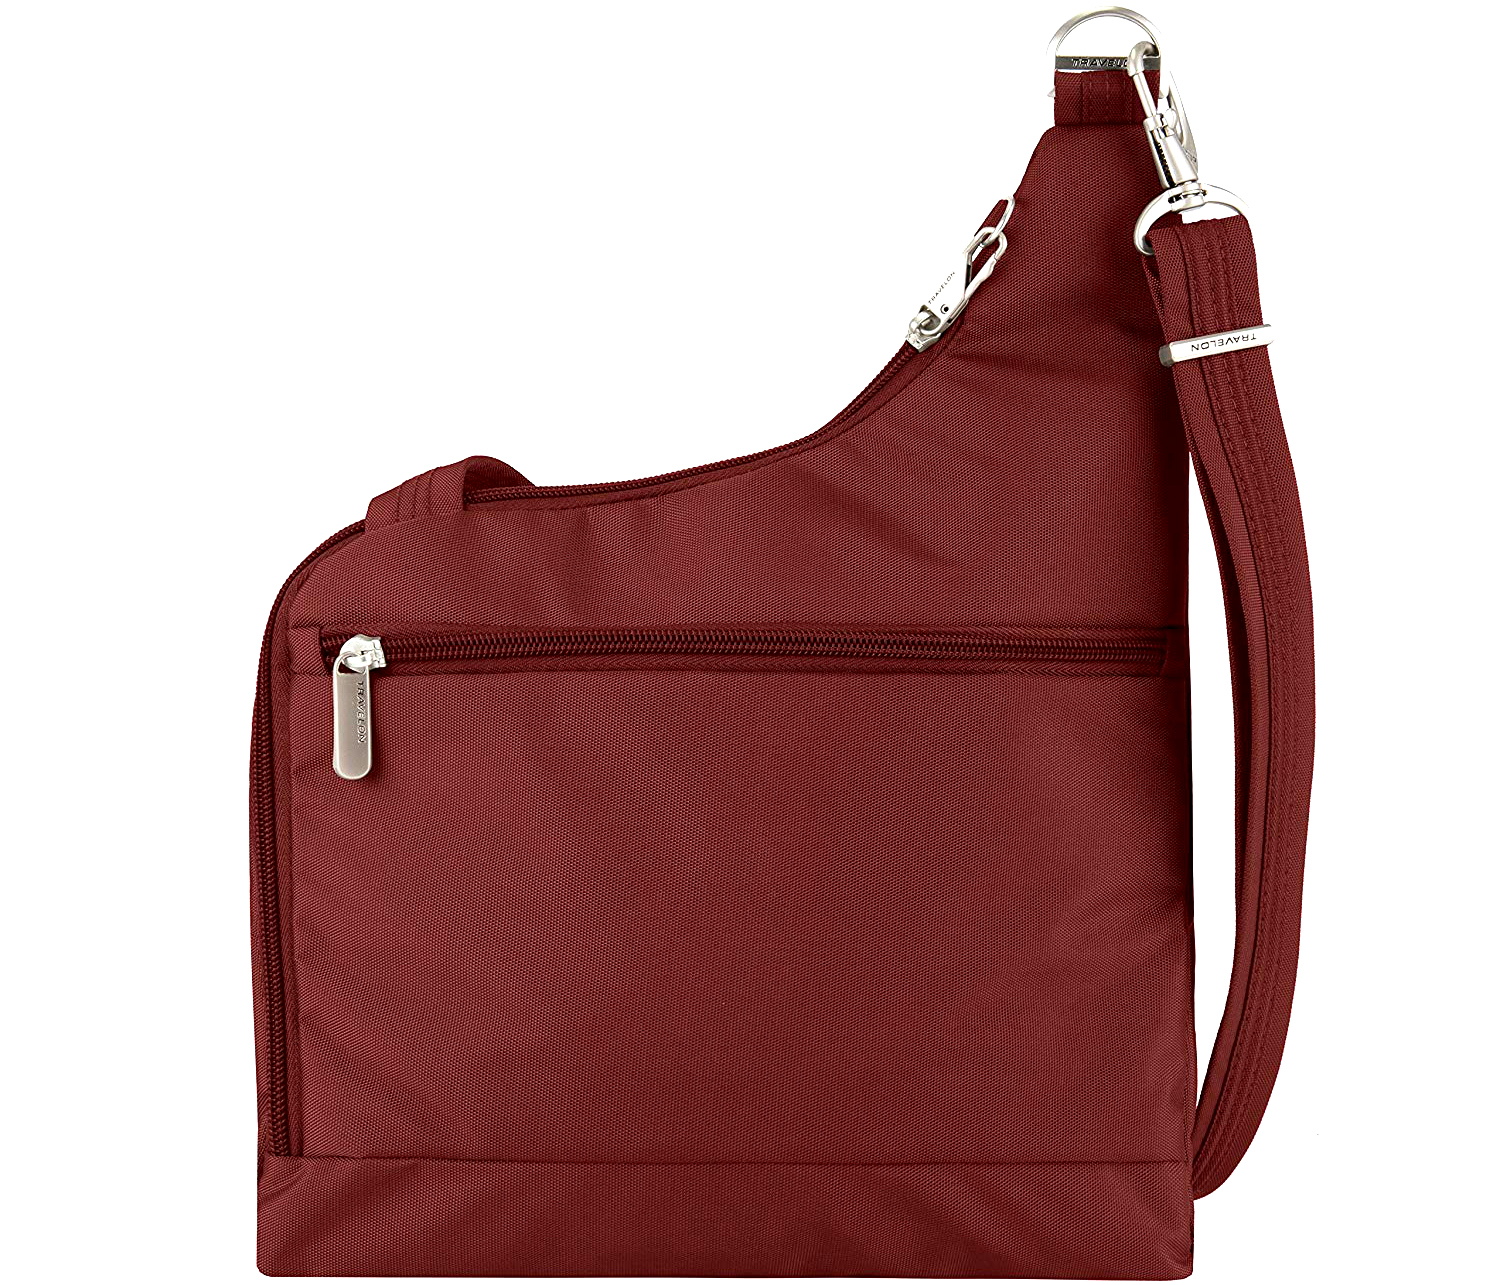 The actual pay Decent Travelon Crossbody Bag Review: #1 Selling Purse for Travelers